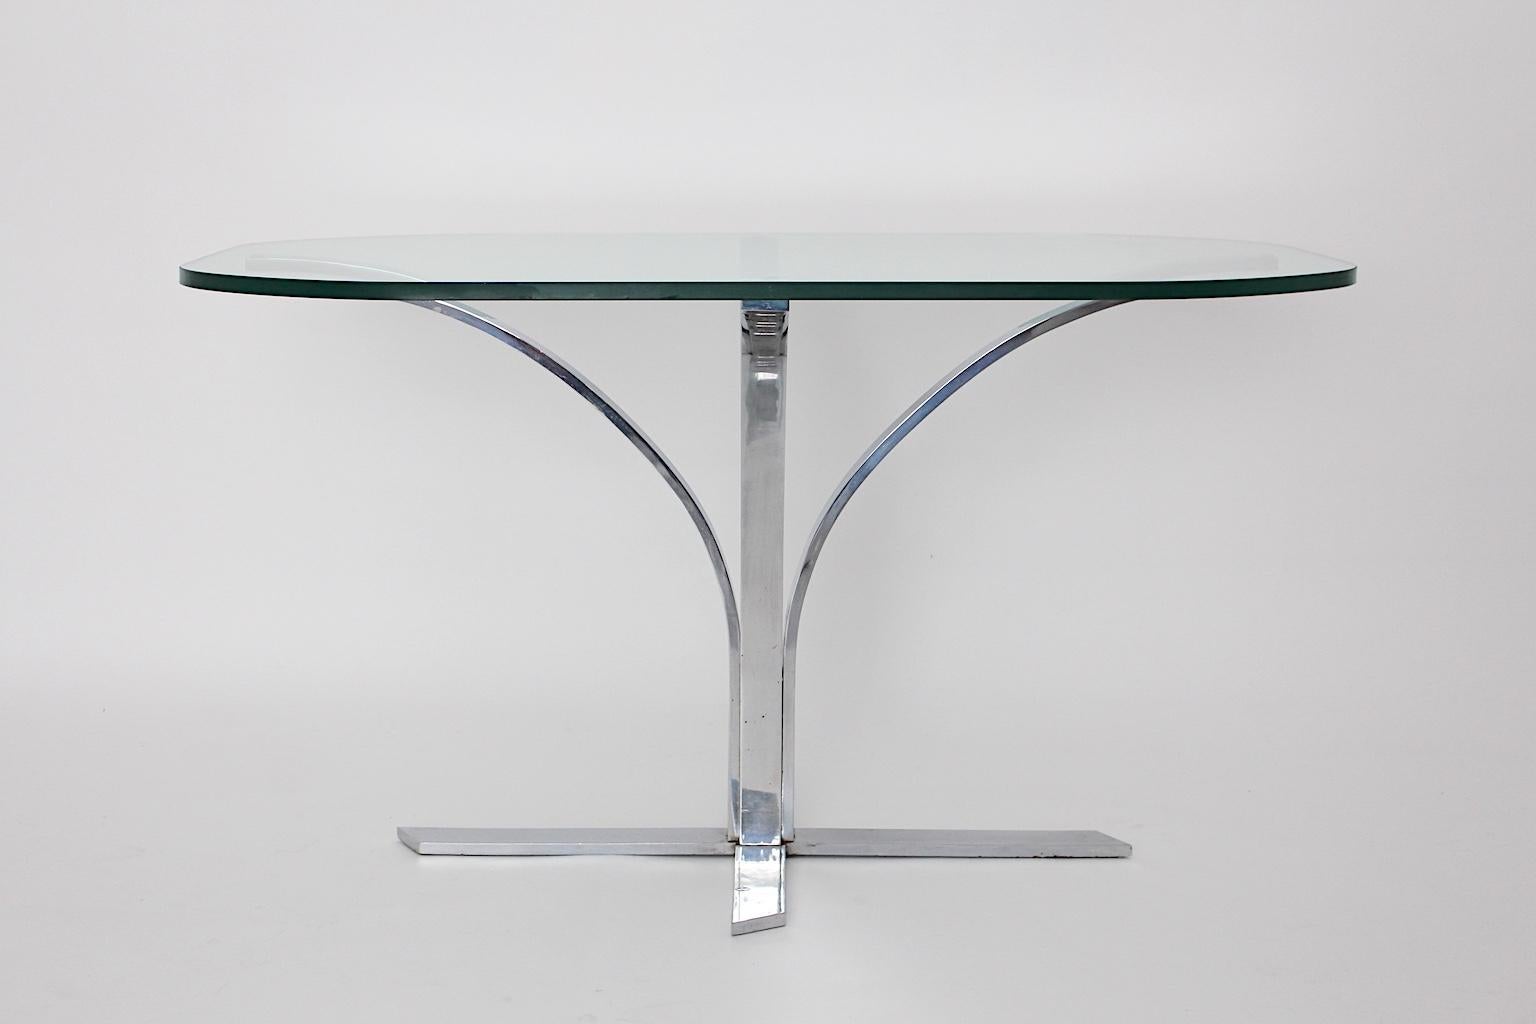 A space age chromed metal vintage dining table or writing table, which was designed and manufactured, 1960s, Germany.
The base is a chromed metal construction, which holds a clear glass top with a thickness of 0.80 cm.
The design radiates the